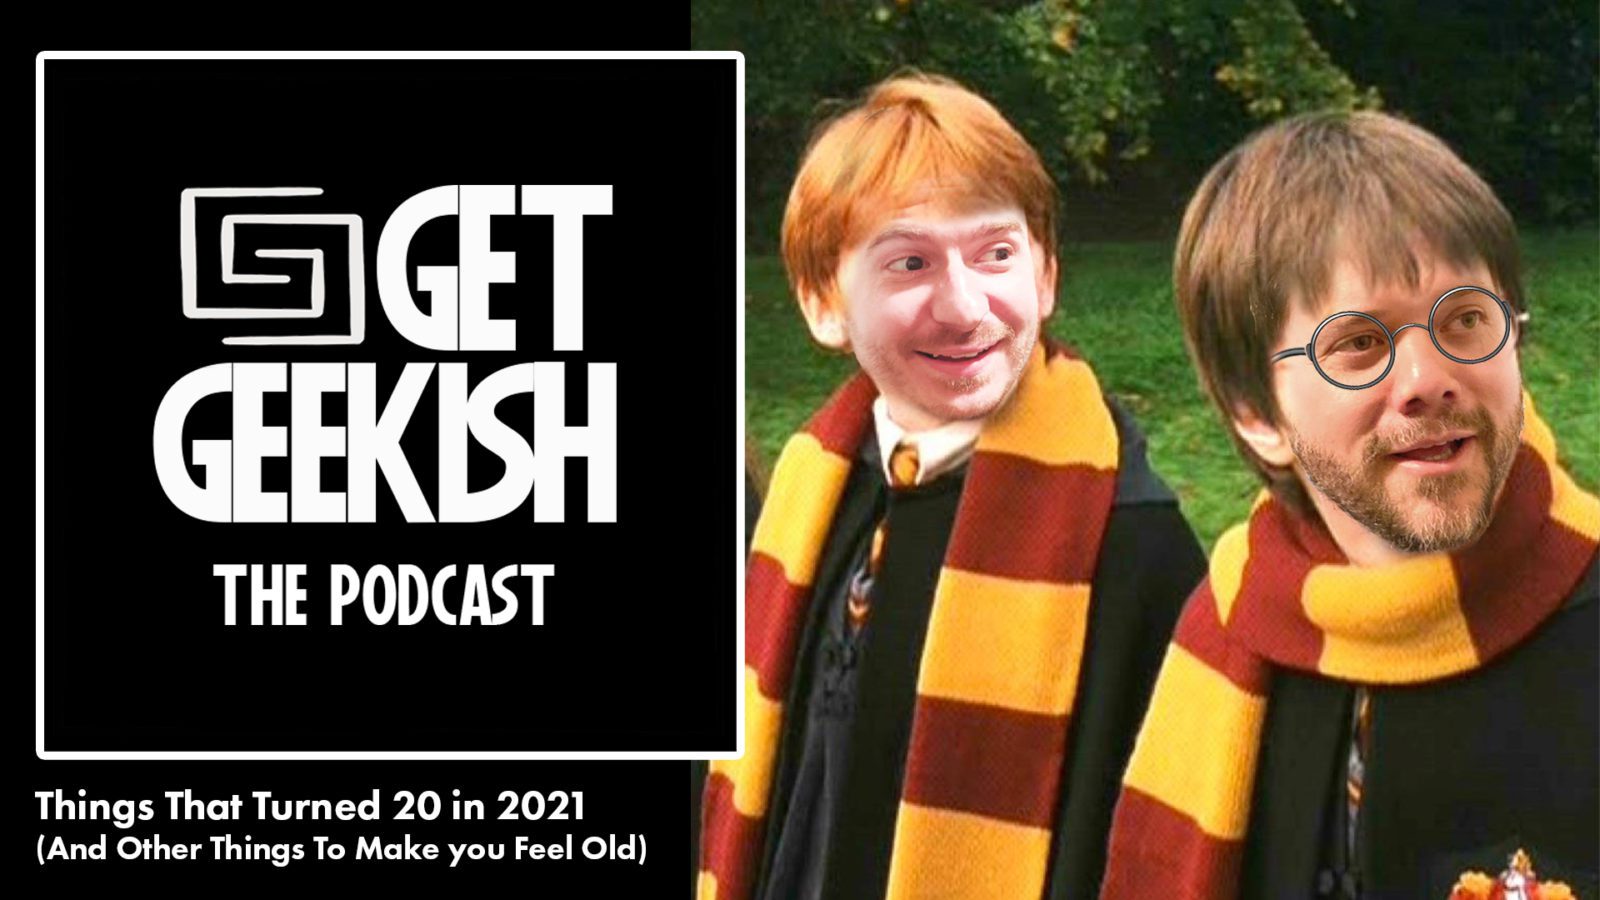 Harry Potter turns 20 Get Geekish Podcast